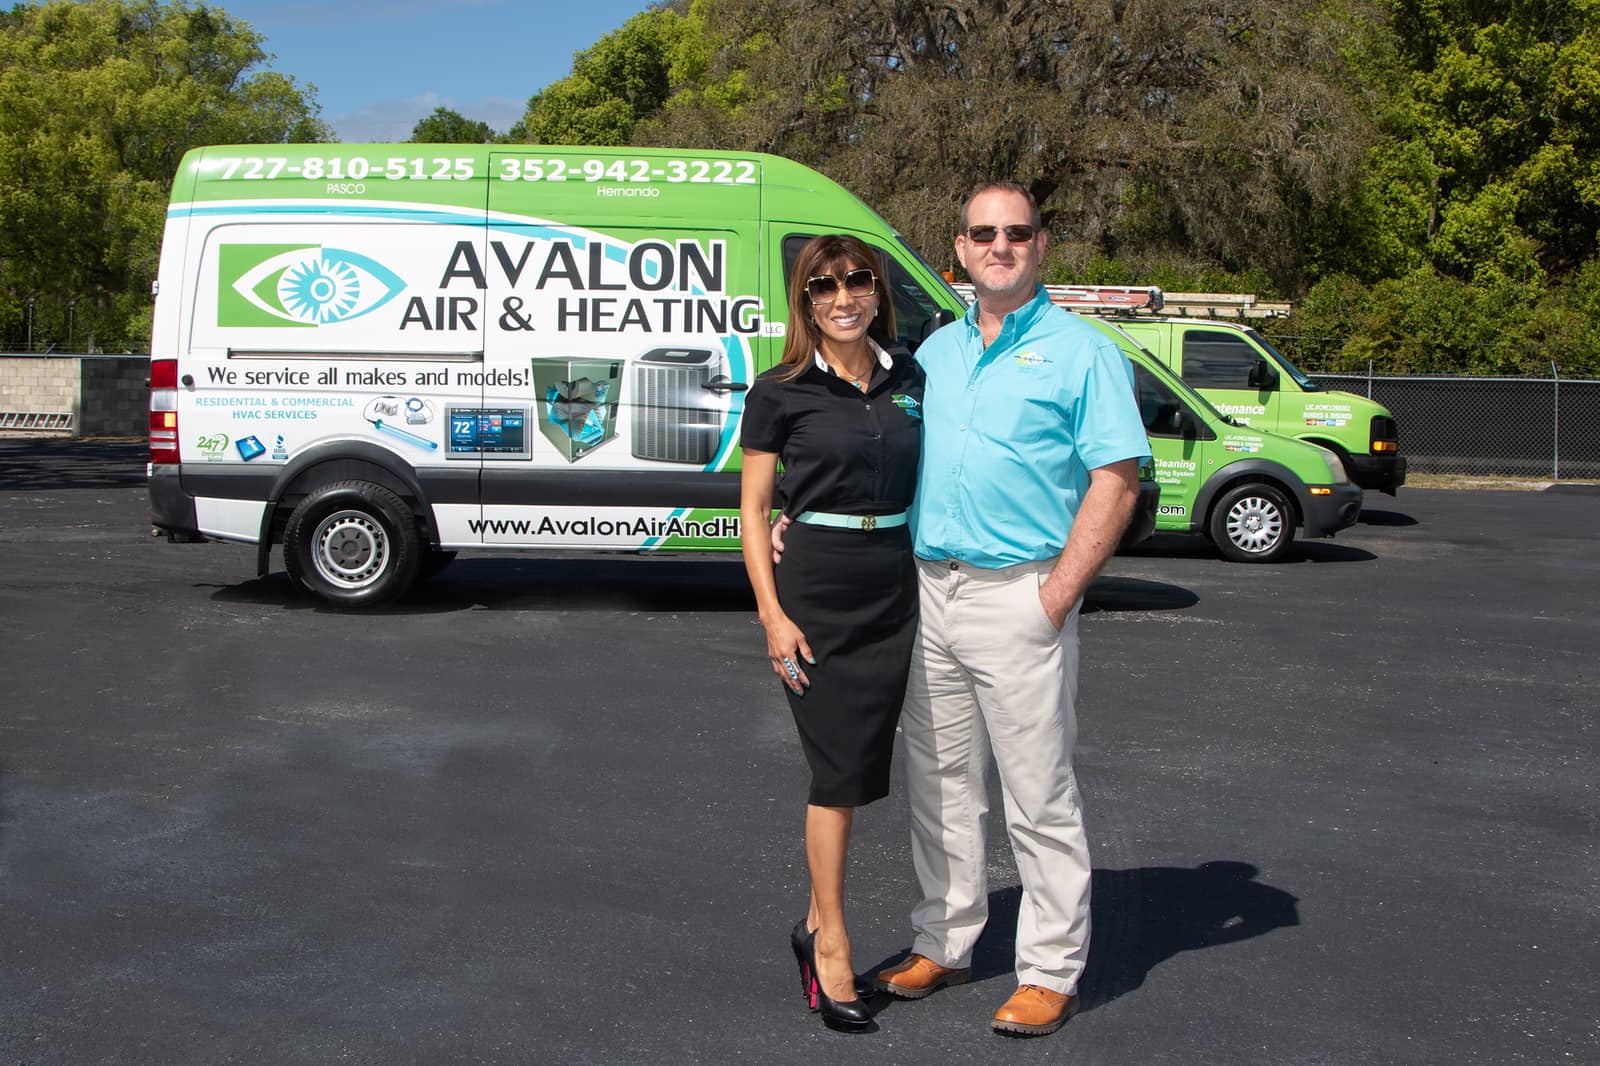 Avalon Air and heating